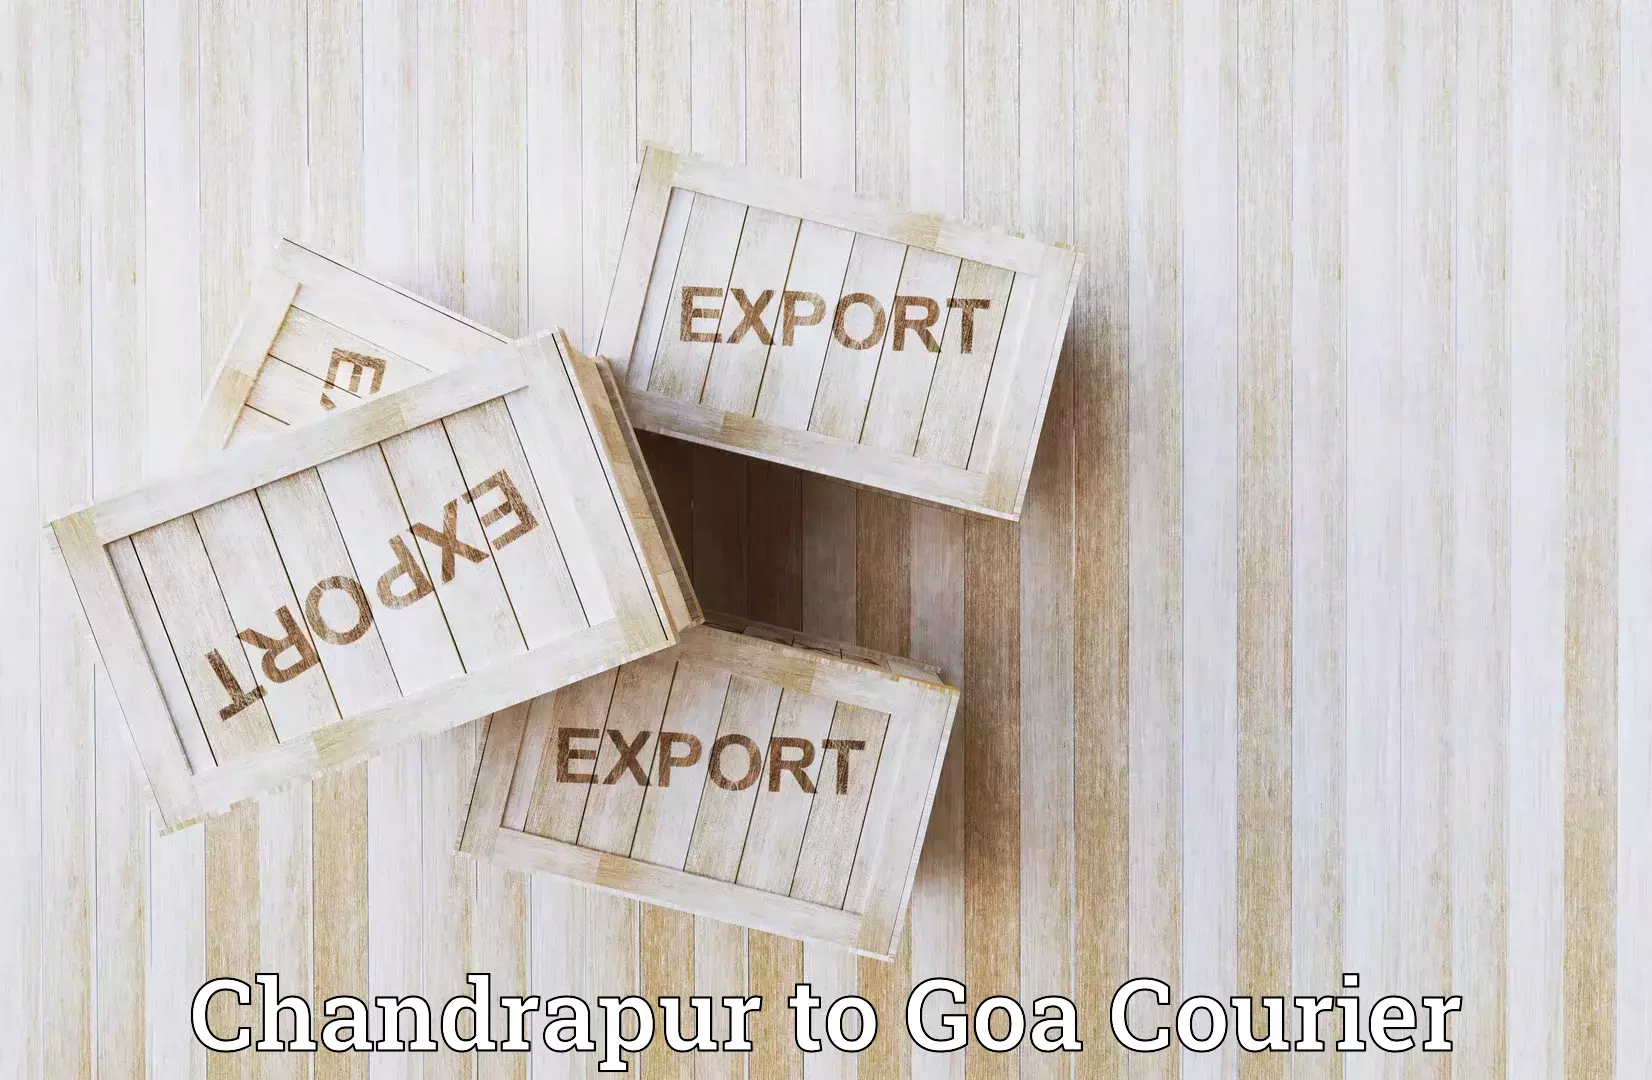 Multi-national courier services Chandrapur to Panaji